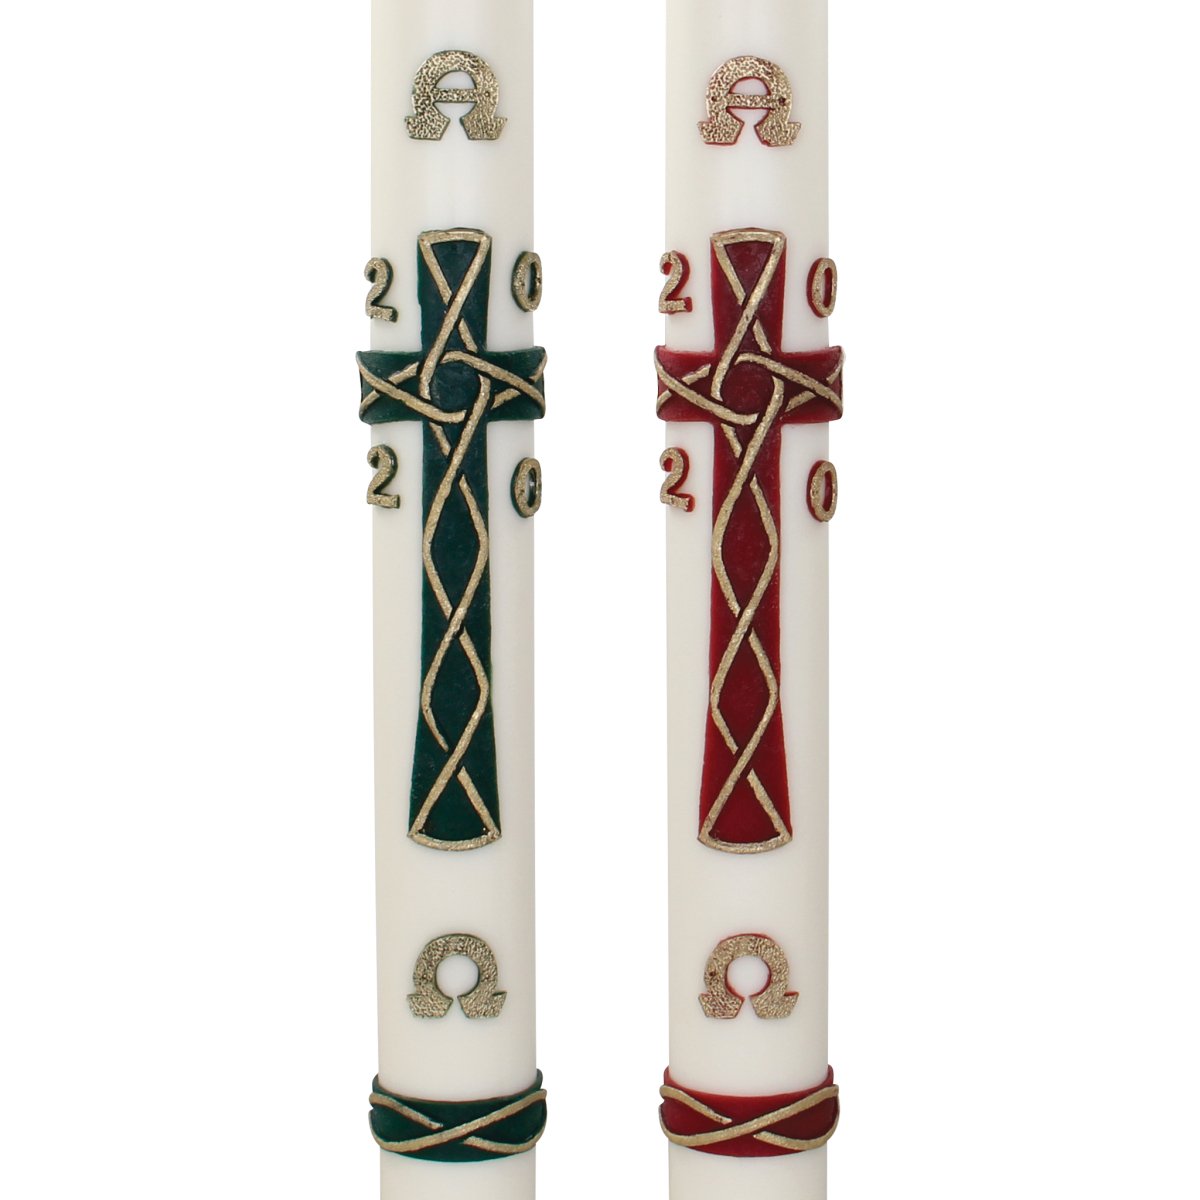 Celtic Cross Wax Relief Paschal Candle - Hayes & Finch